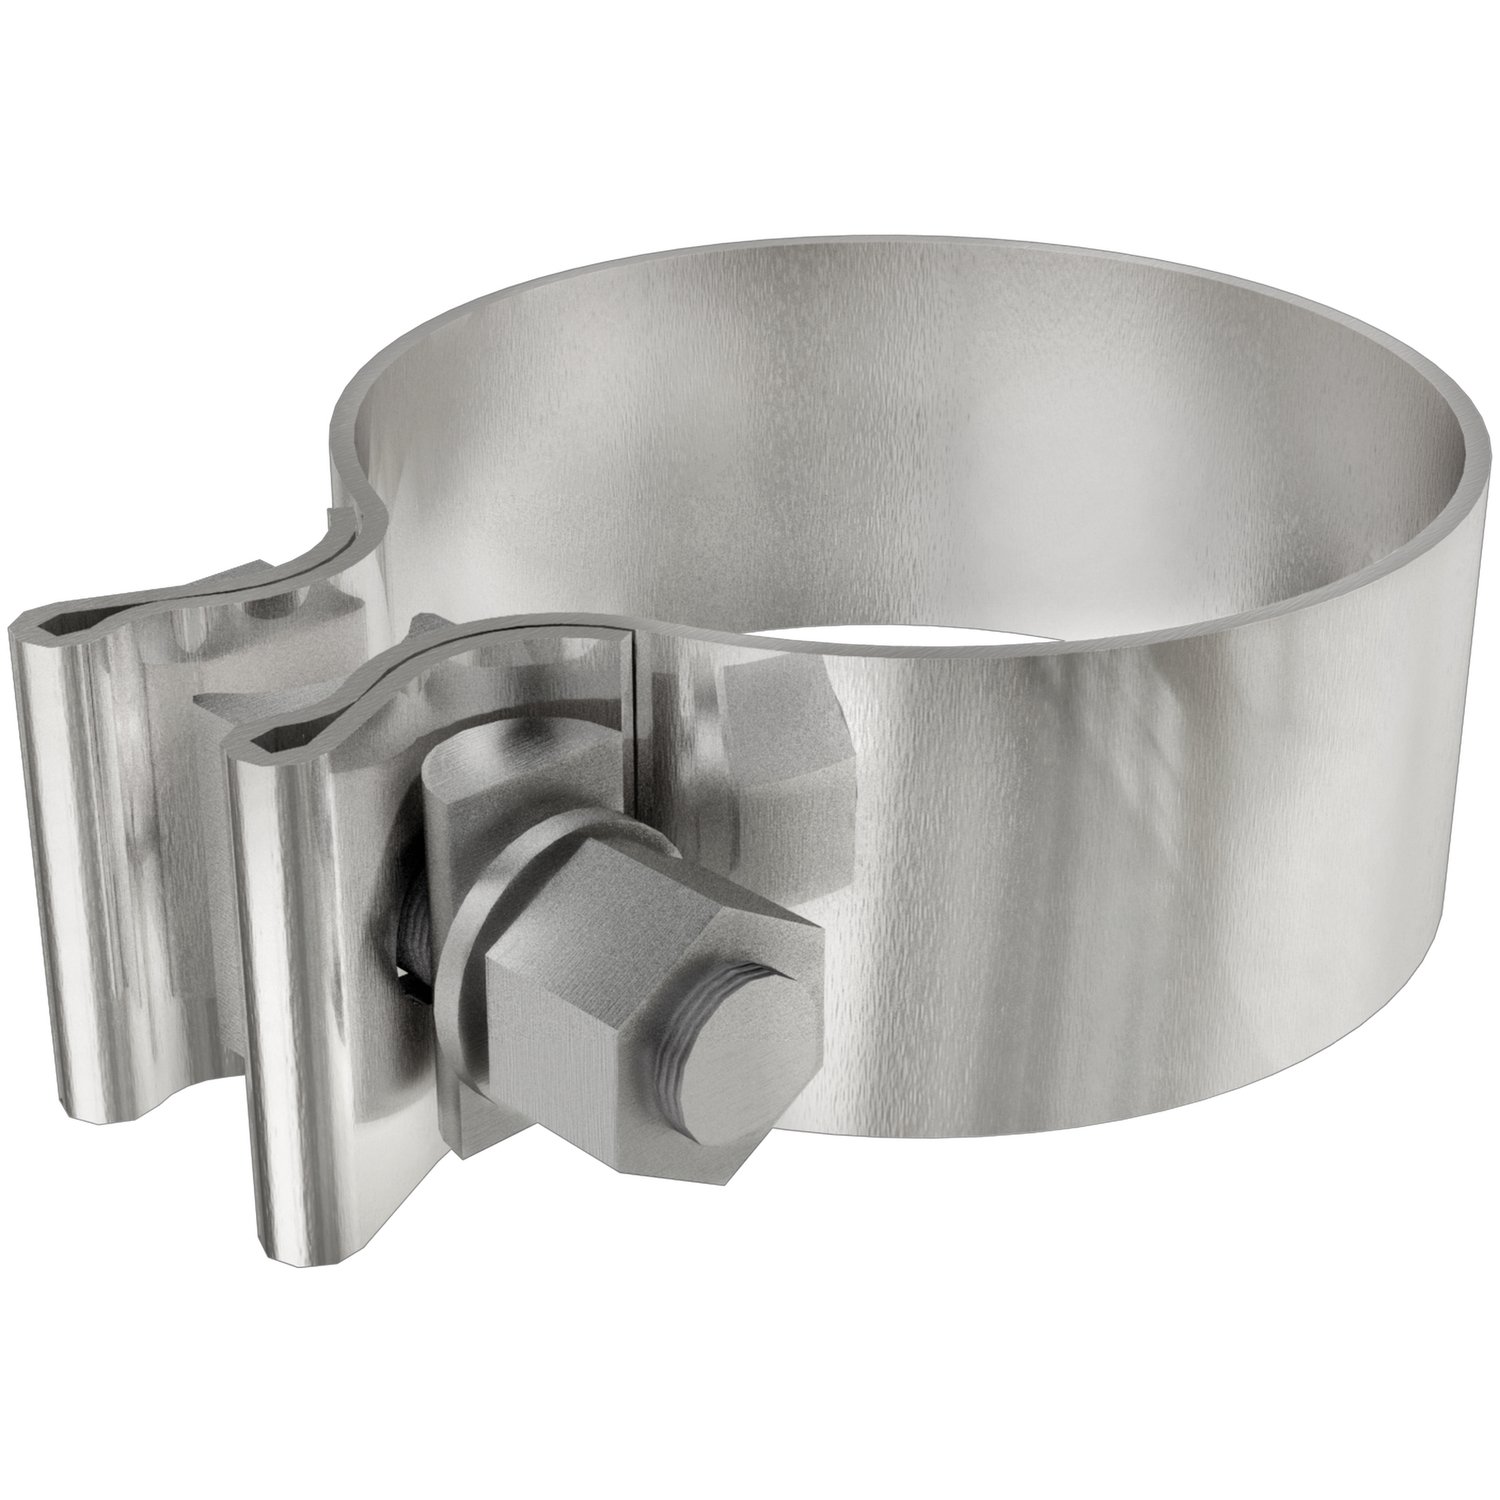 AccuSeal Stainless Steel Exhaust Band Clamps Clamp Diameter: 3.5"